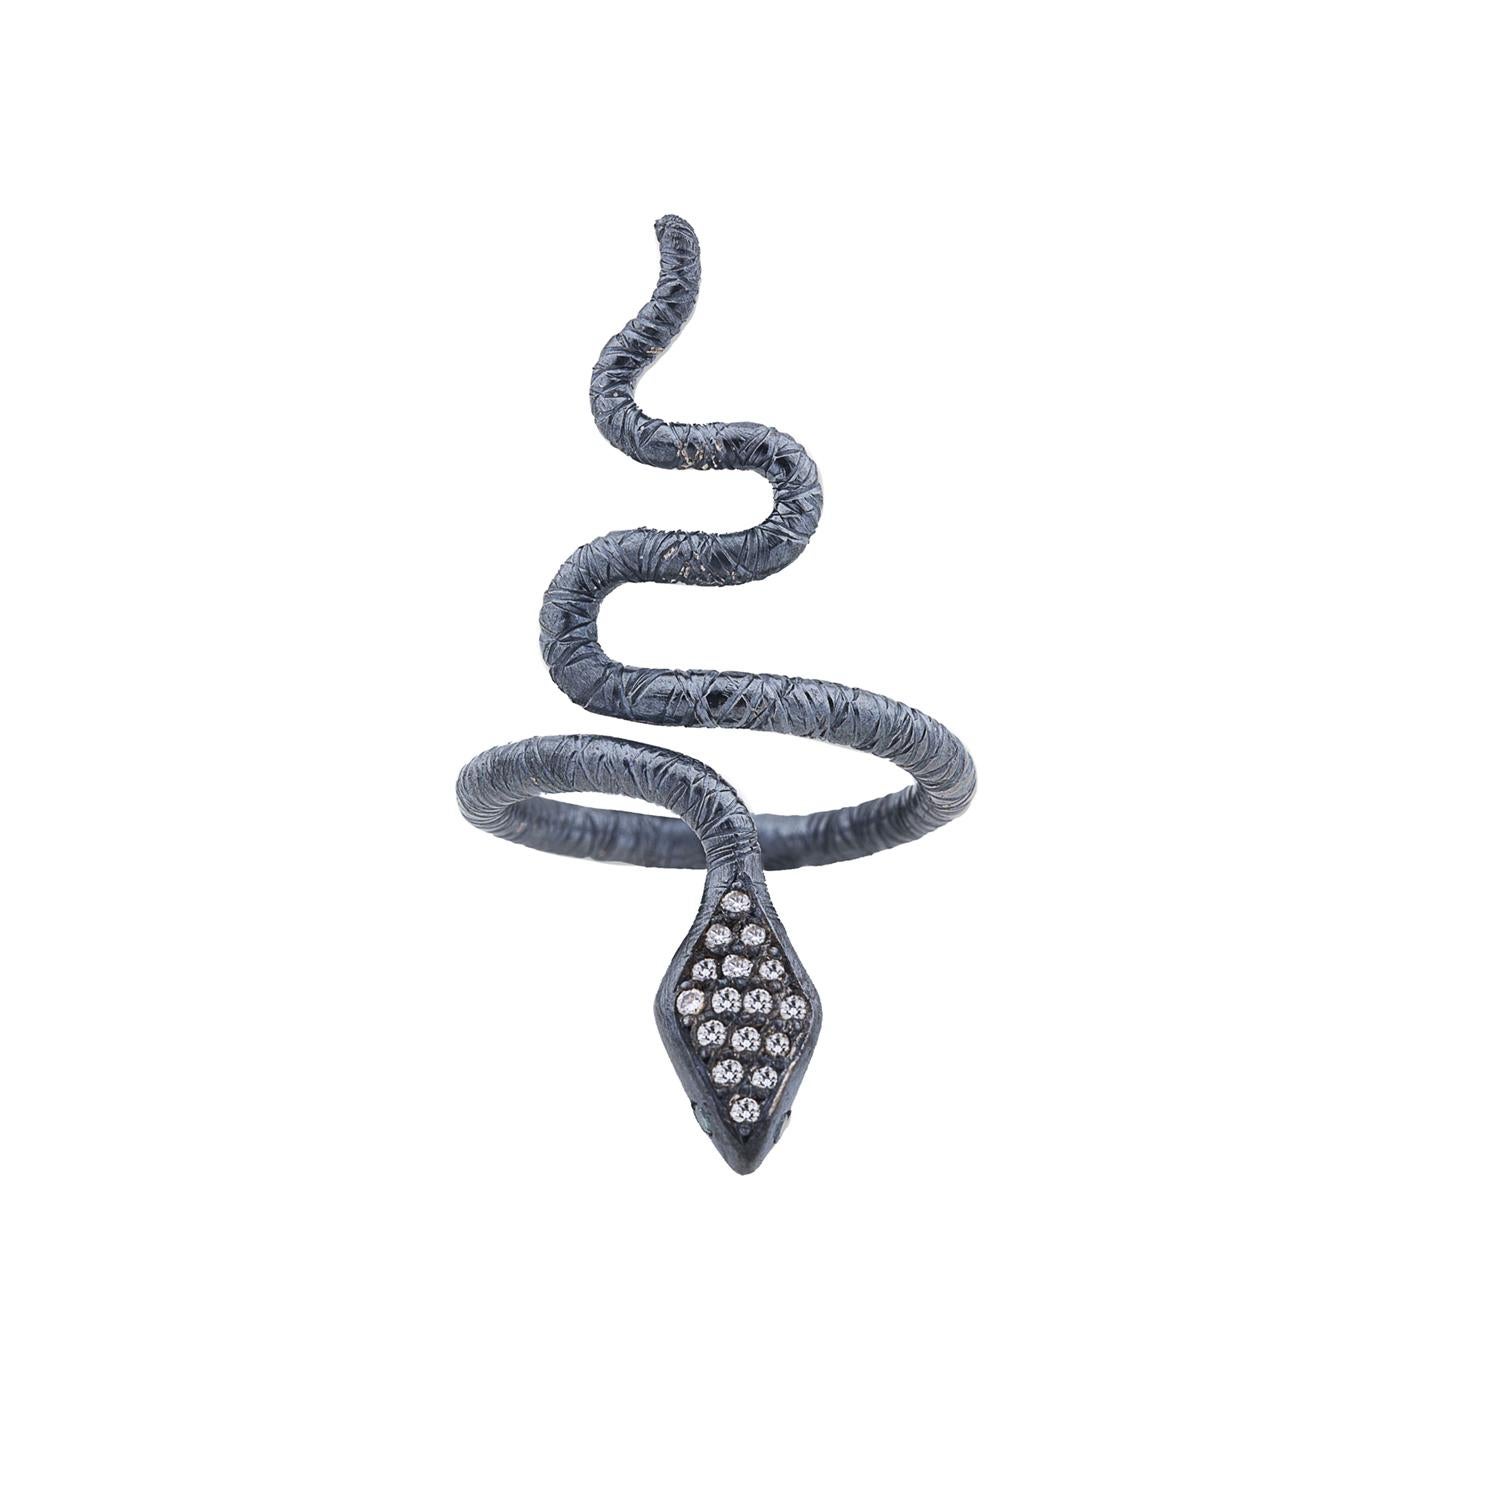 The Oxidized Sterling Silver Snake Ring by Lika Behar is a striking piece featuring a sinuous snake design intricately crafted from oxidized sterling silver. Adorned with sparkling white diamonds along its back and vivid green diamond eyes, this